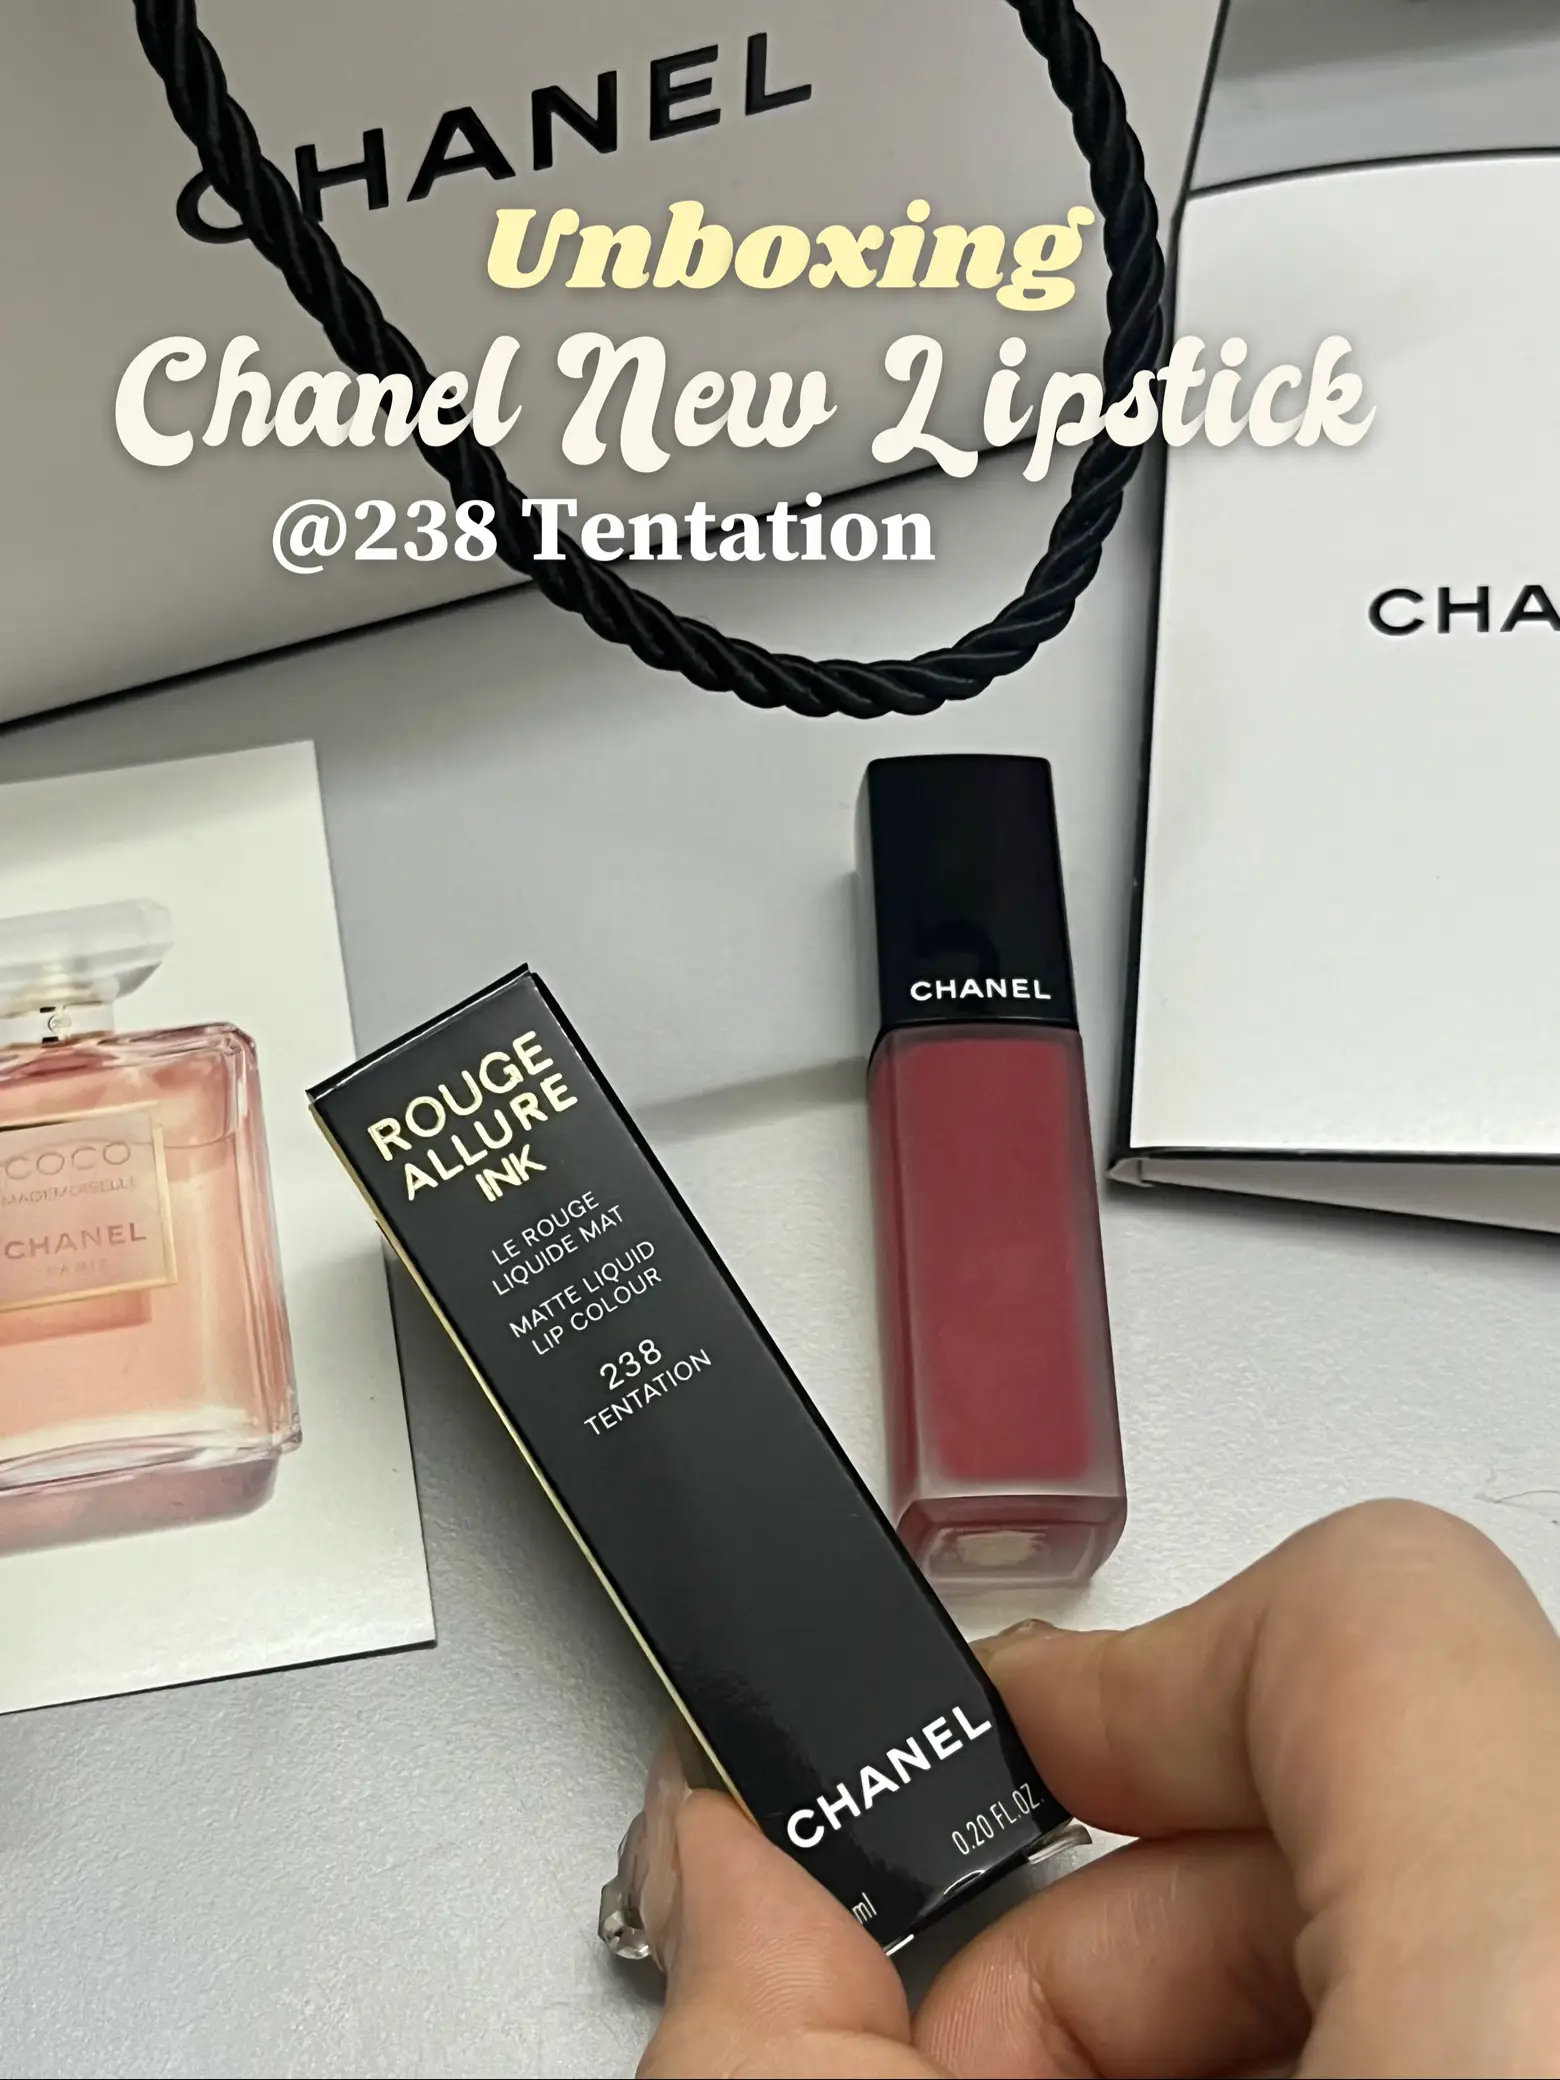 Unboxing Chanel New Lipstick 💄, Video published by Faye 🐨